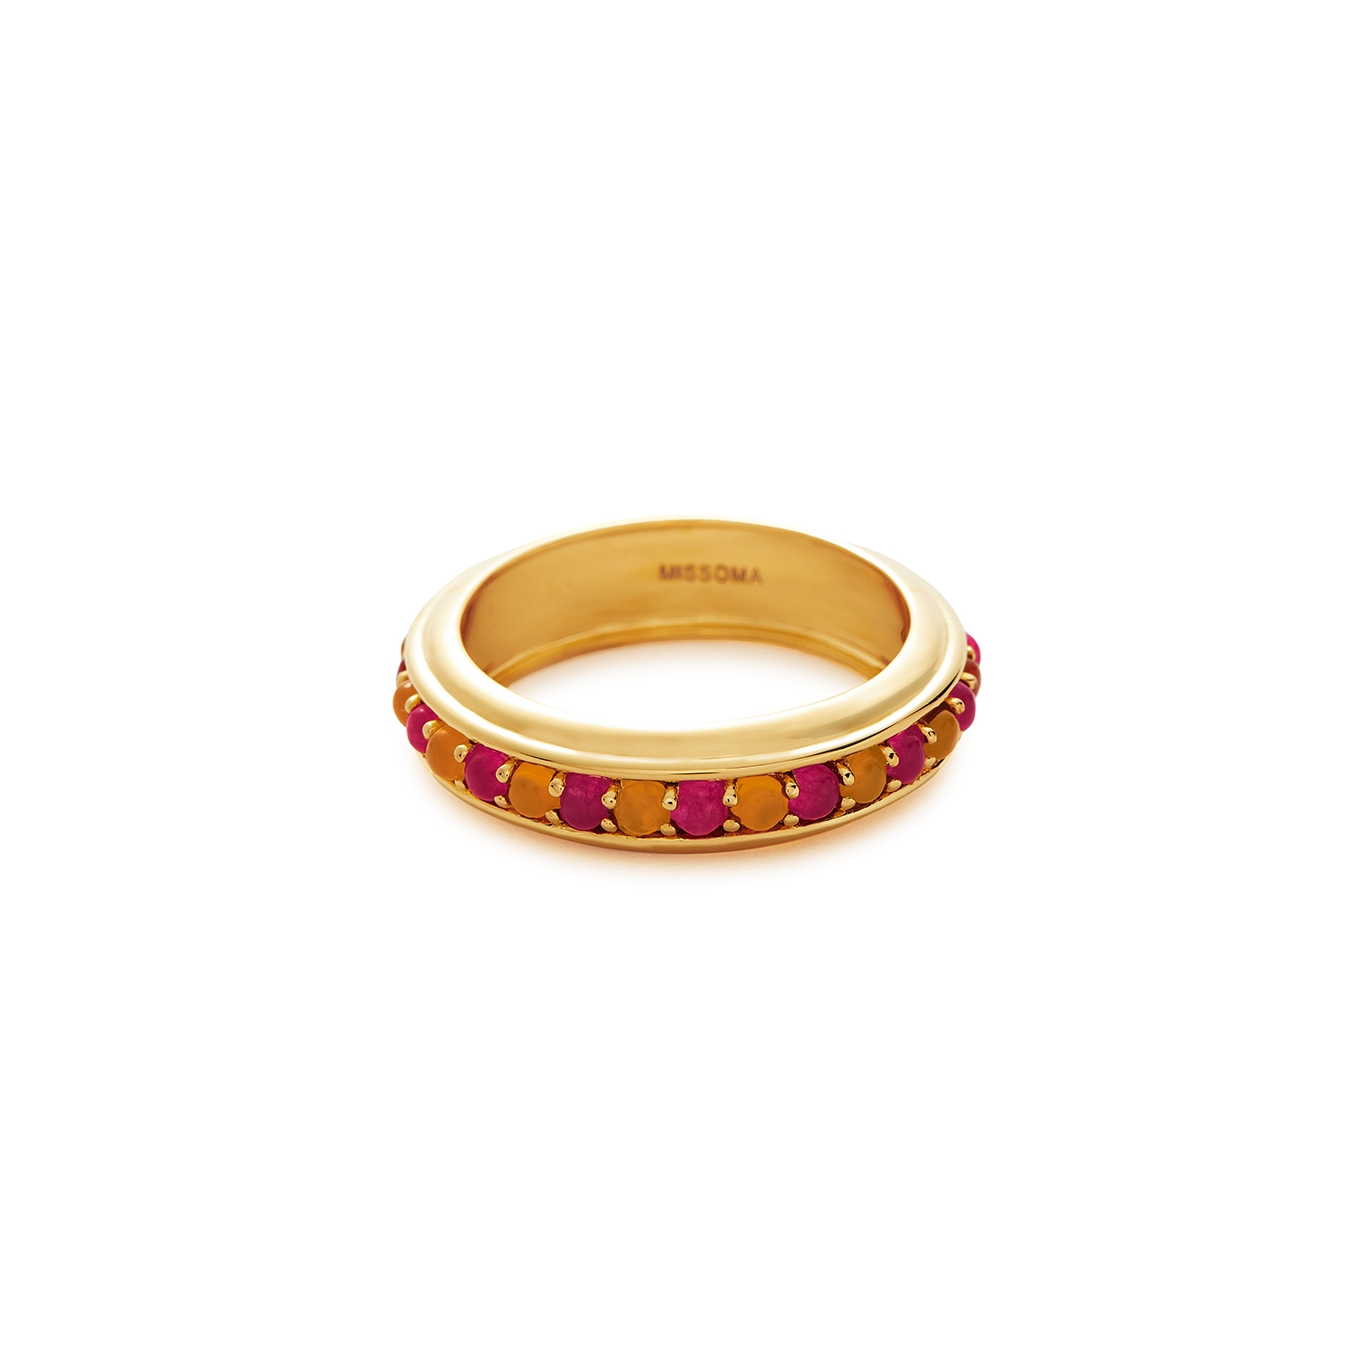 Missoma Hot Rox 18kt Gold-plated Vermeil Ring - L